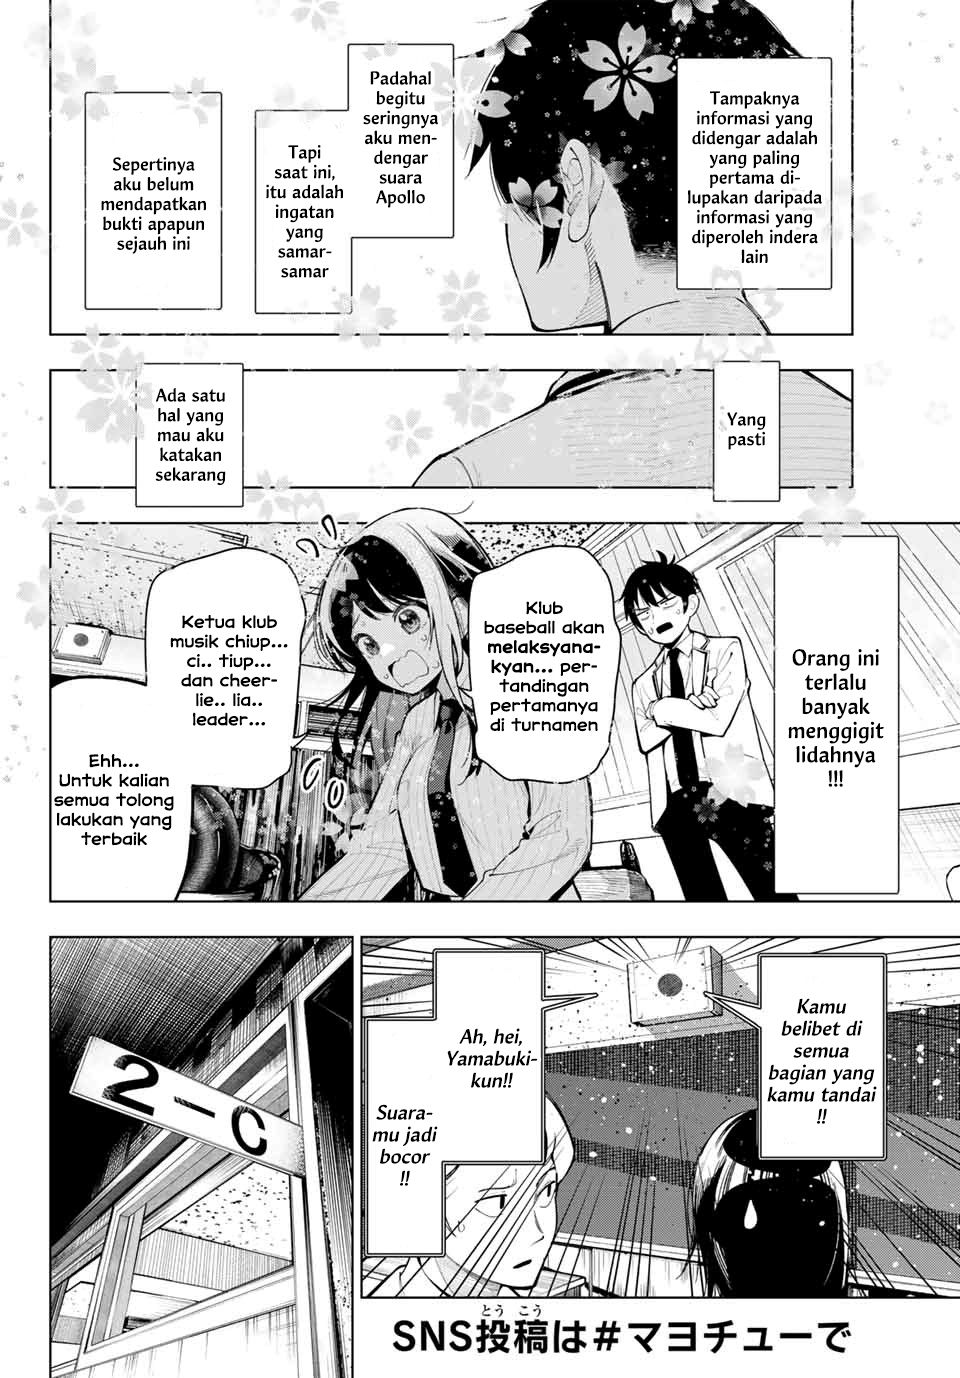 Mayonaka Heart Tune (Tune In to the Midnight Heart) Chapter 02 Image 15